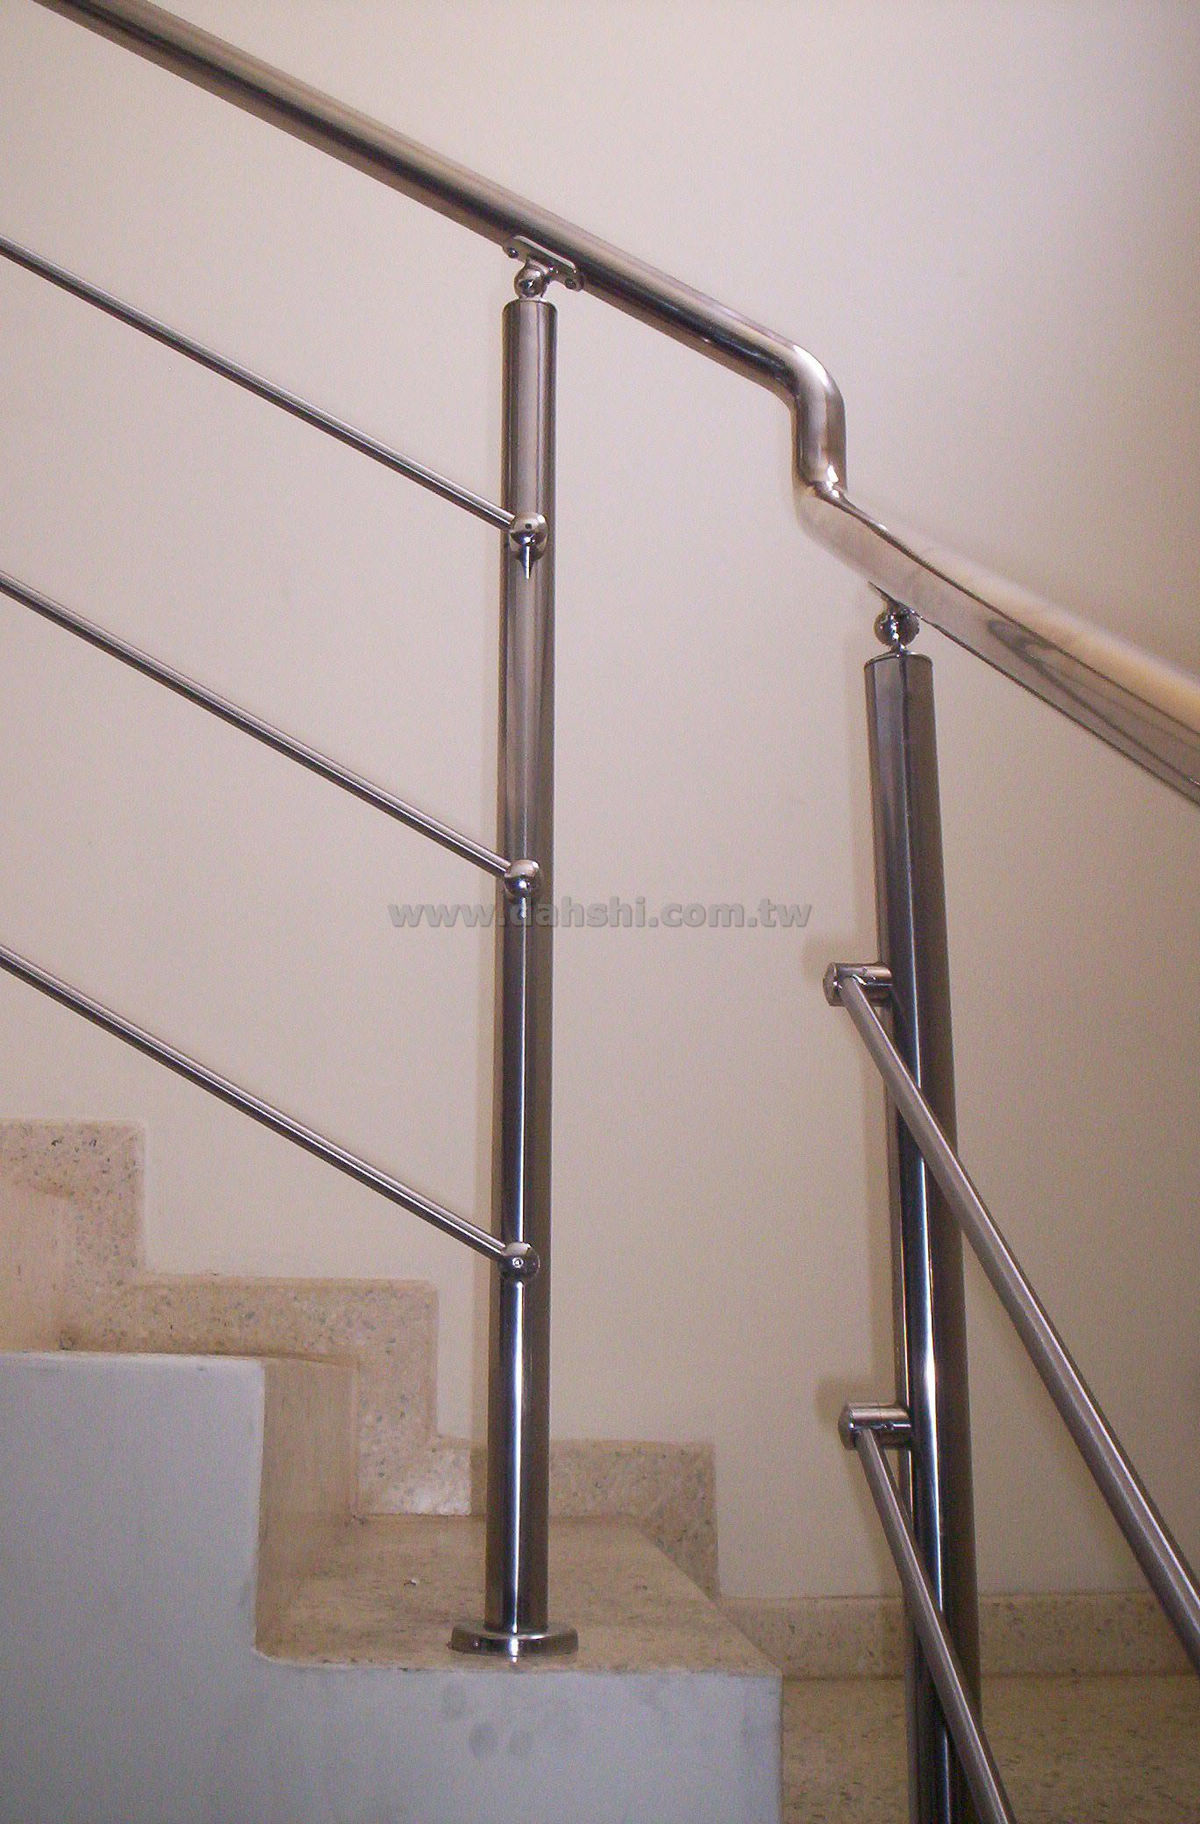 Handrail and Balusters Story for Xiomara Montiel